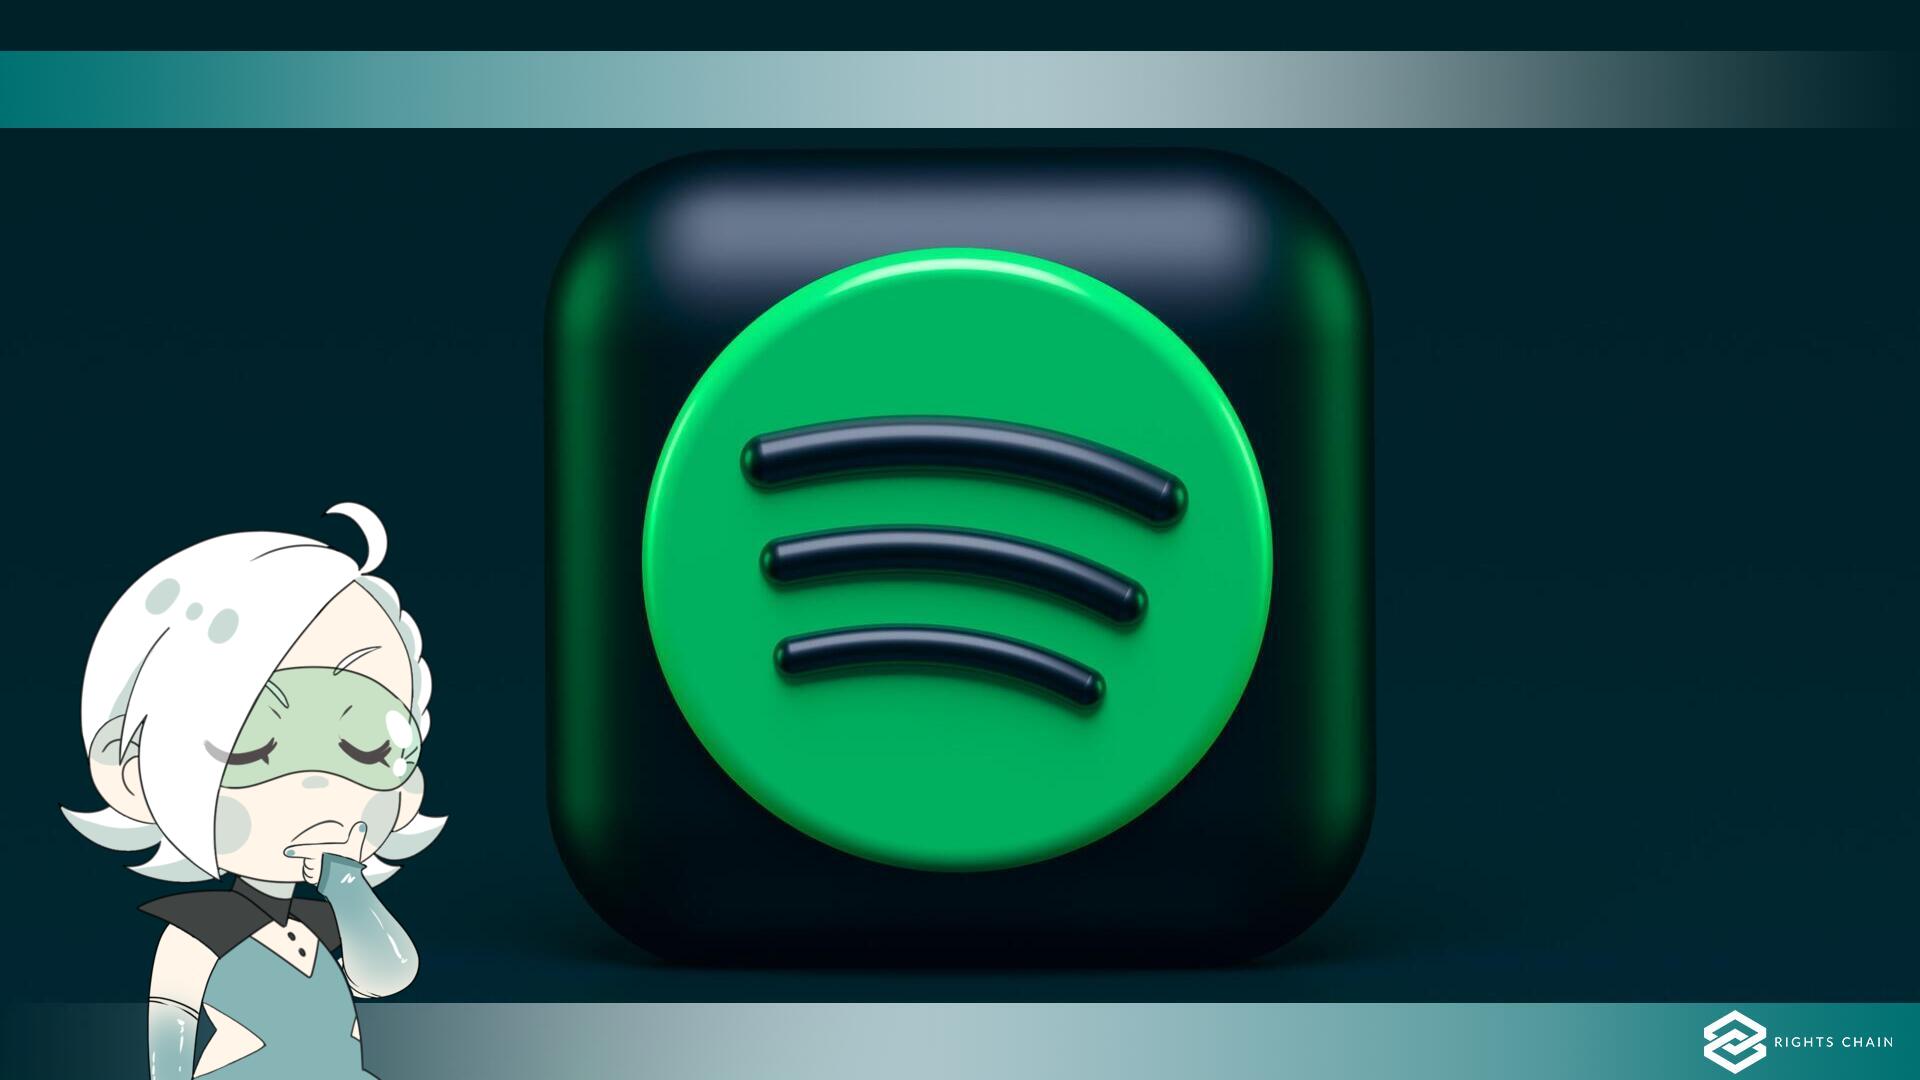  Spotify to slash royalties for rain sounds, white noise and other non-music tracks.